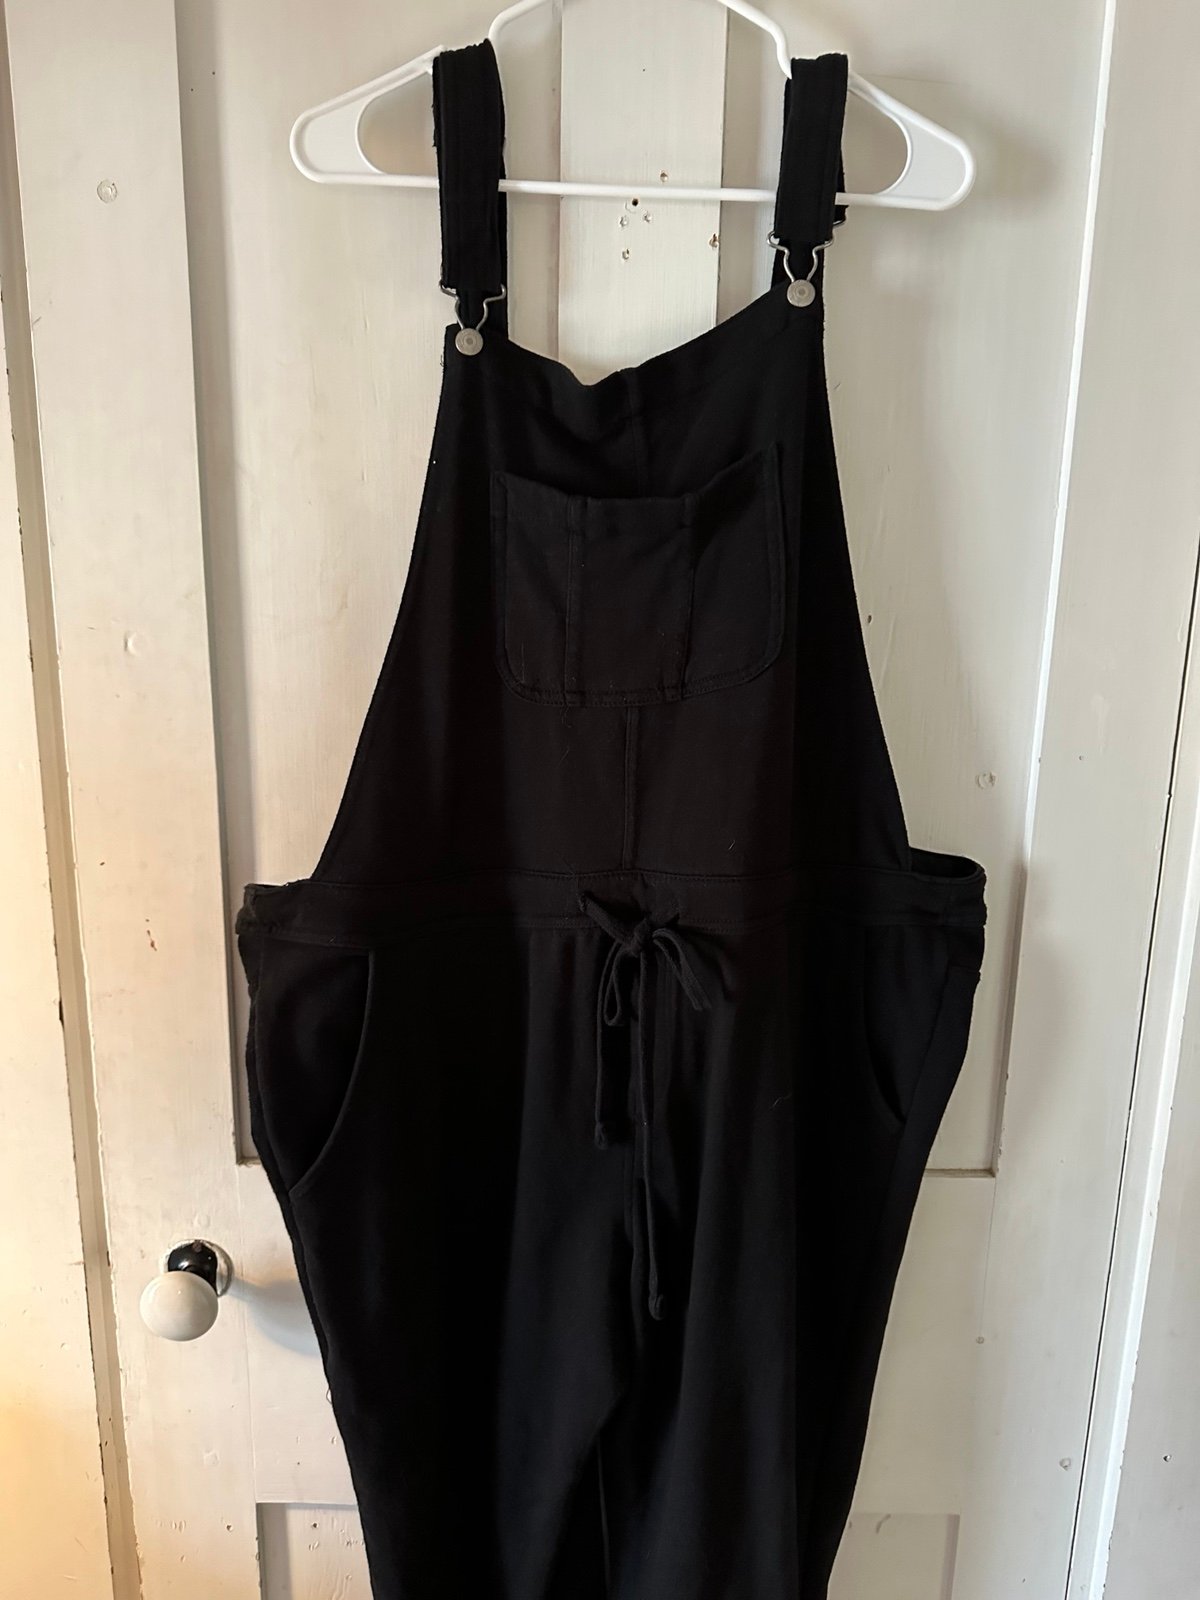 Wholesale price Overalls nDepk4hKx well sale